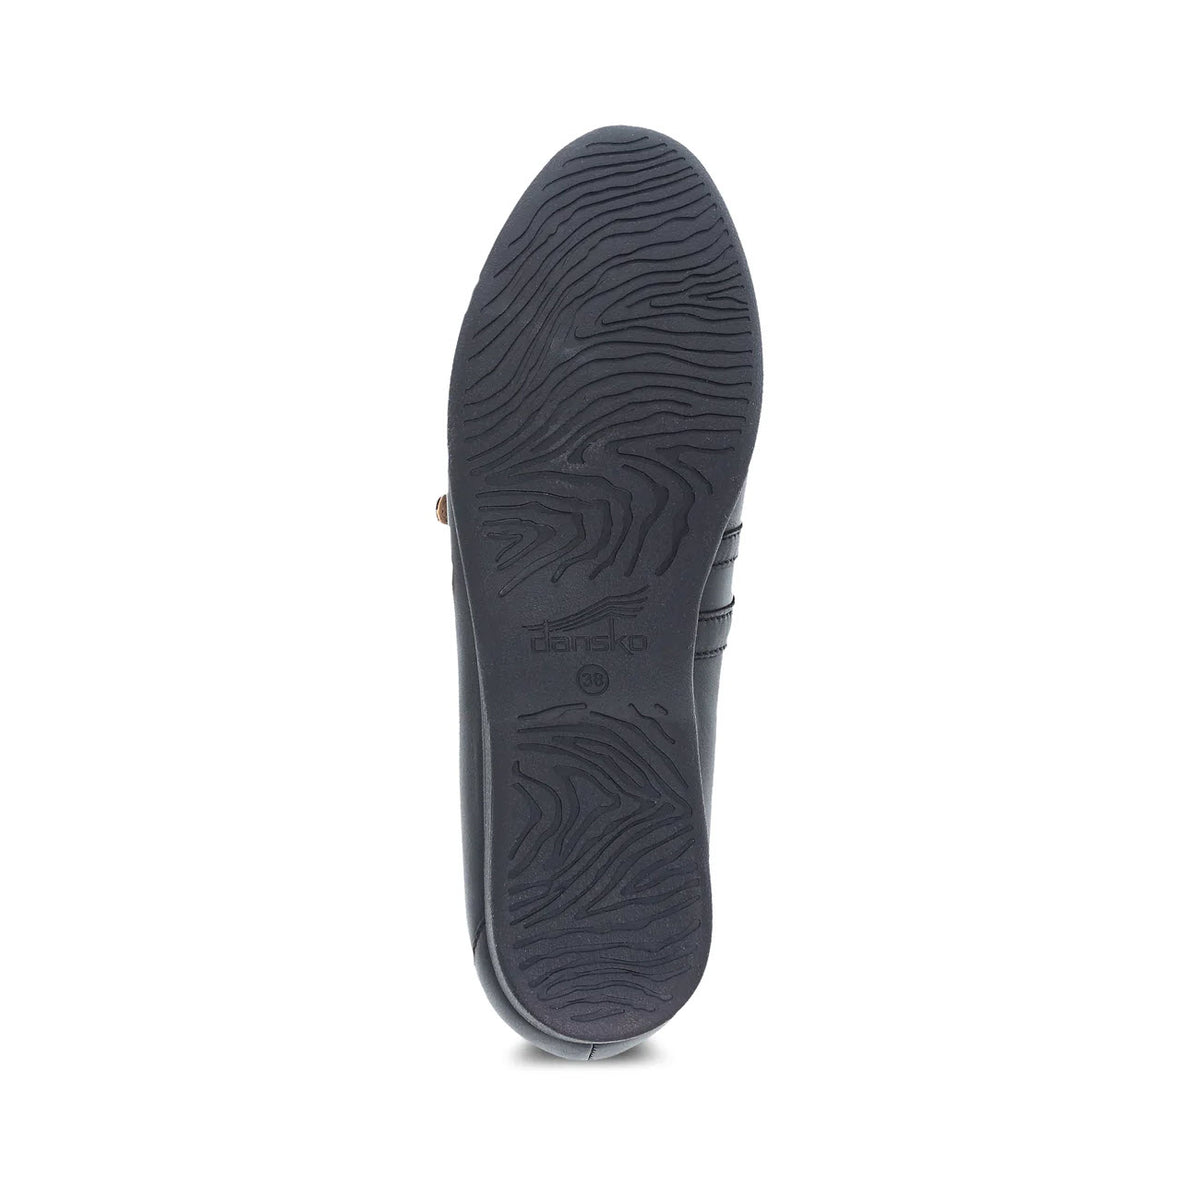 Bottom view of a Dansko Leeza Black - Womens shoe displaying a textured sole with a pattern resembling elegant wood grain, featuring embossed brand logo.